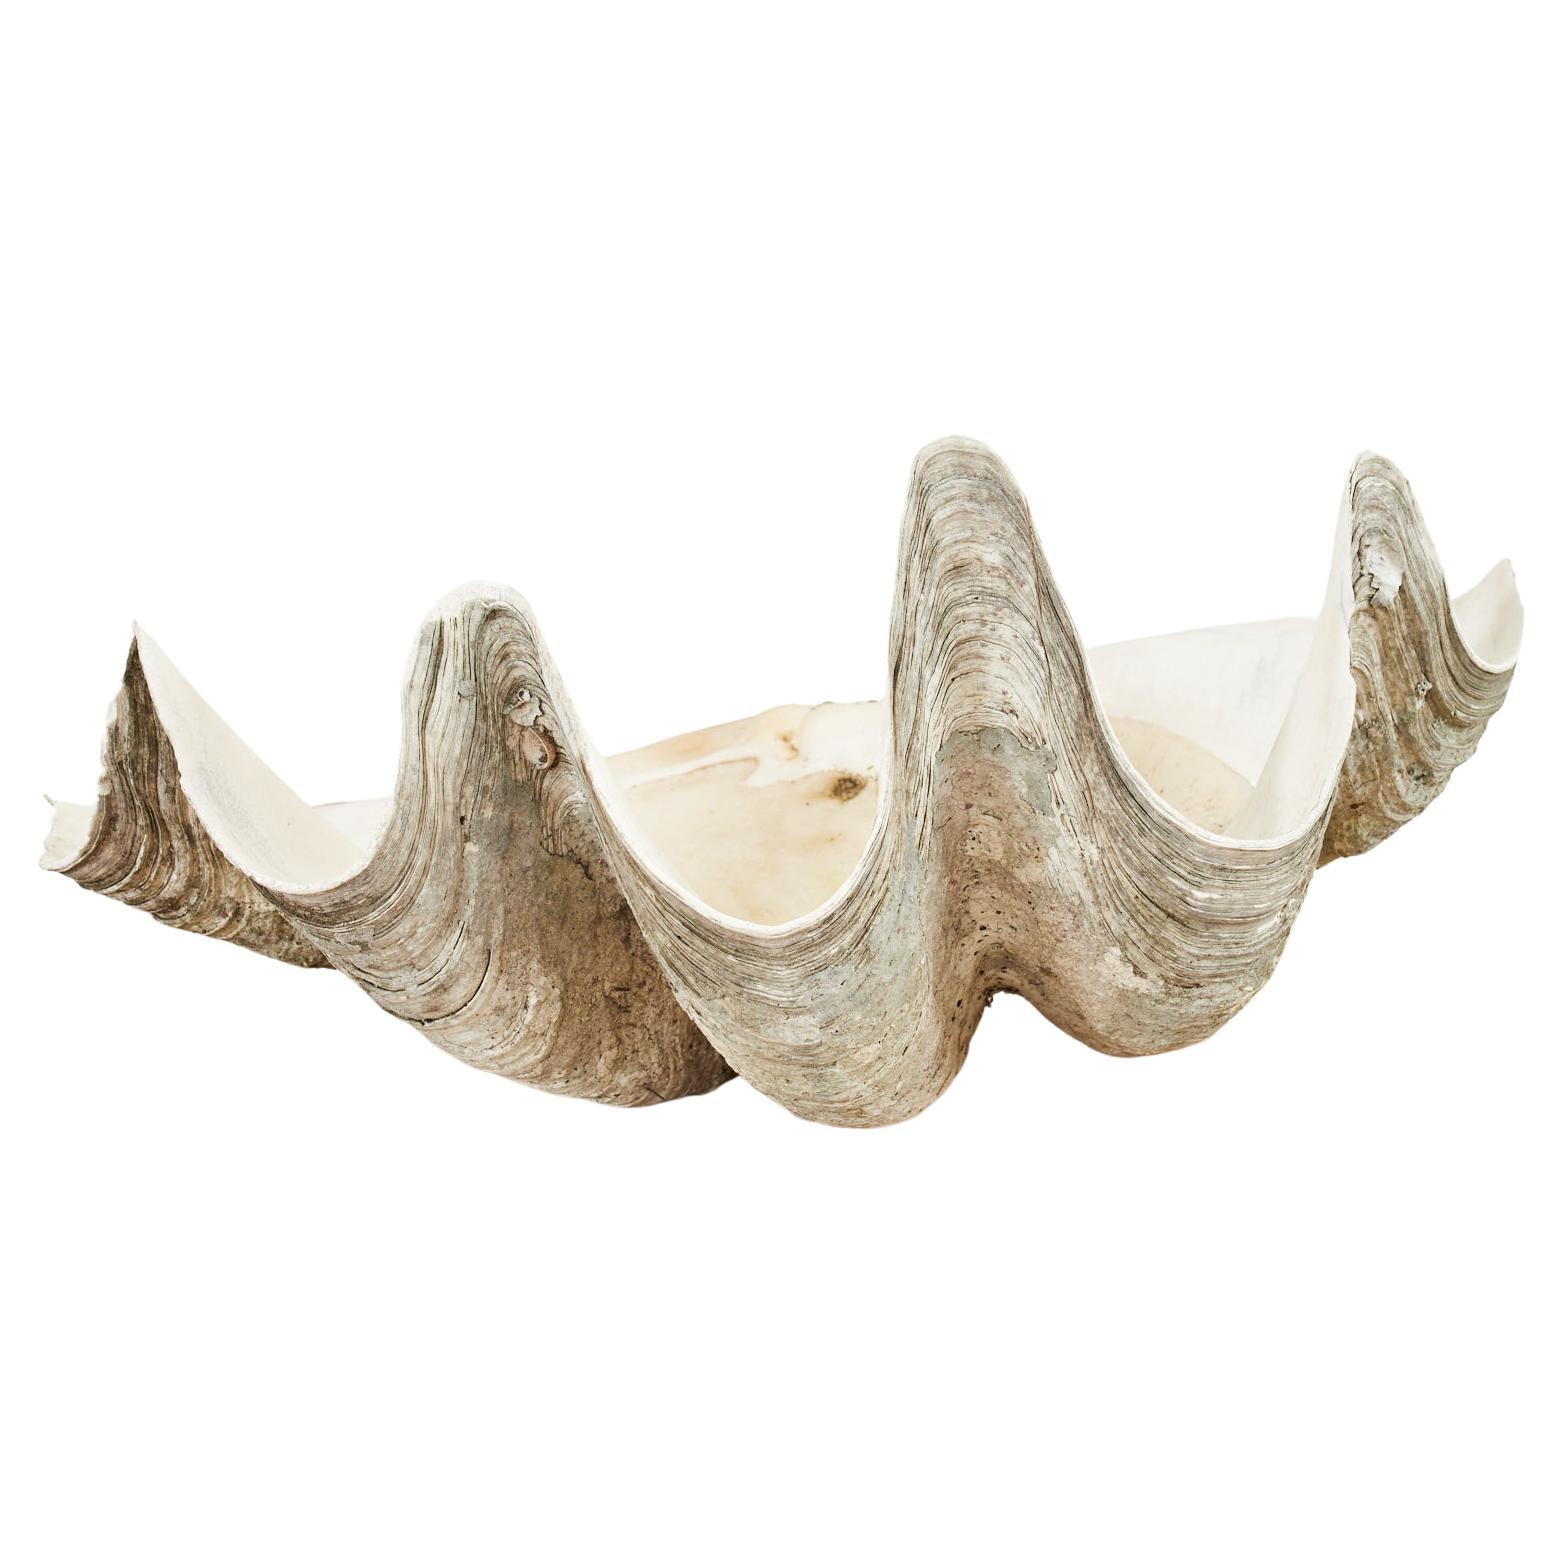 South Pacific Natural Giant Clam Shell Specimen